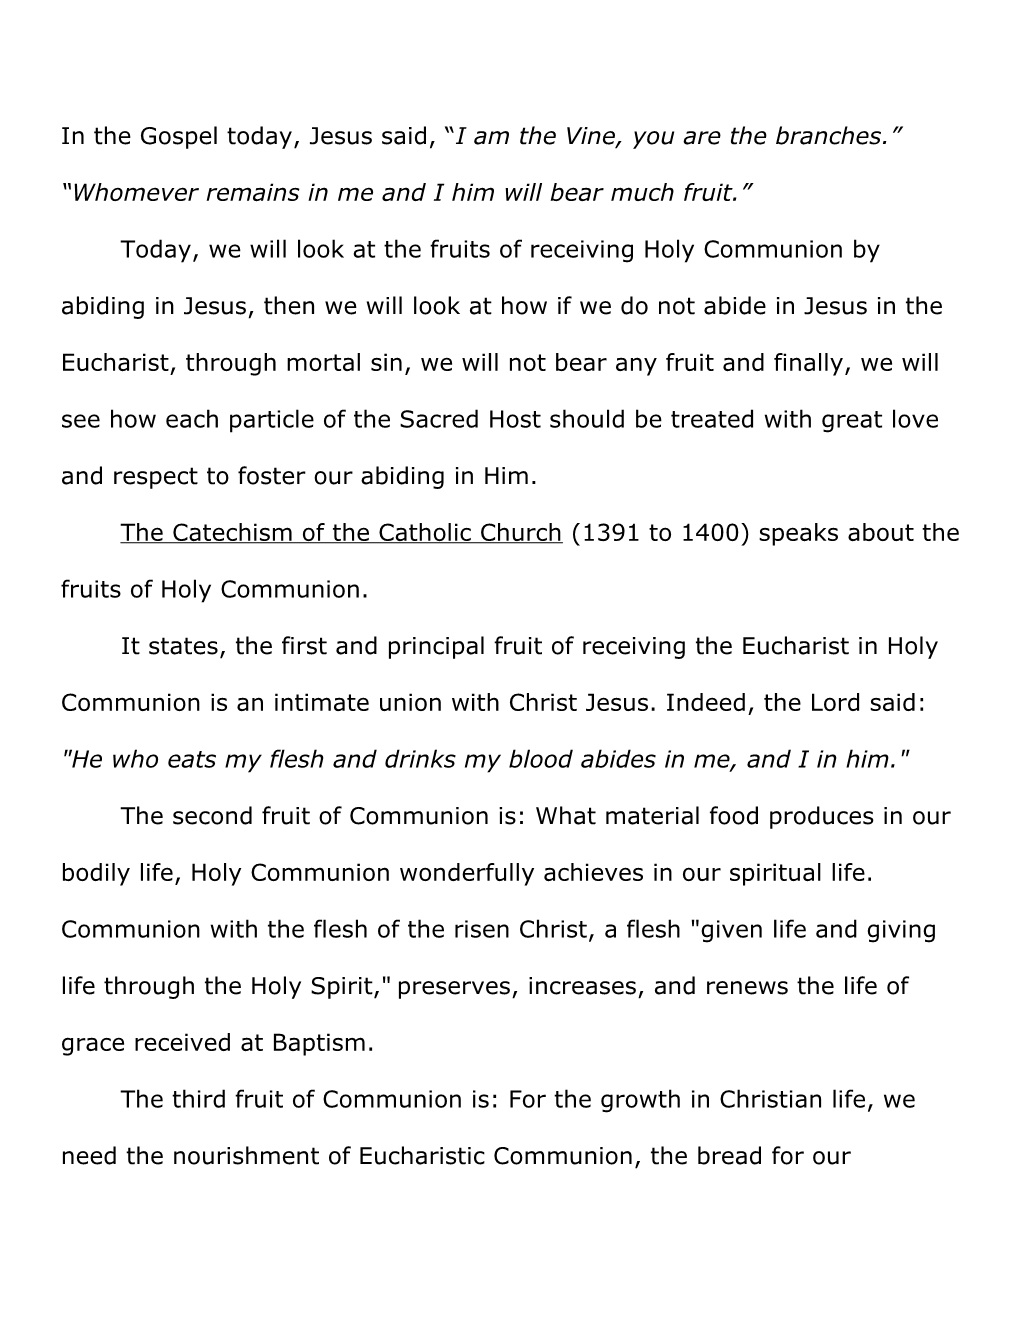 The Catechism of the Catholic Church(1391 to 1400) Speaks About the Fruits of Holy Communion